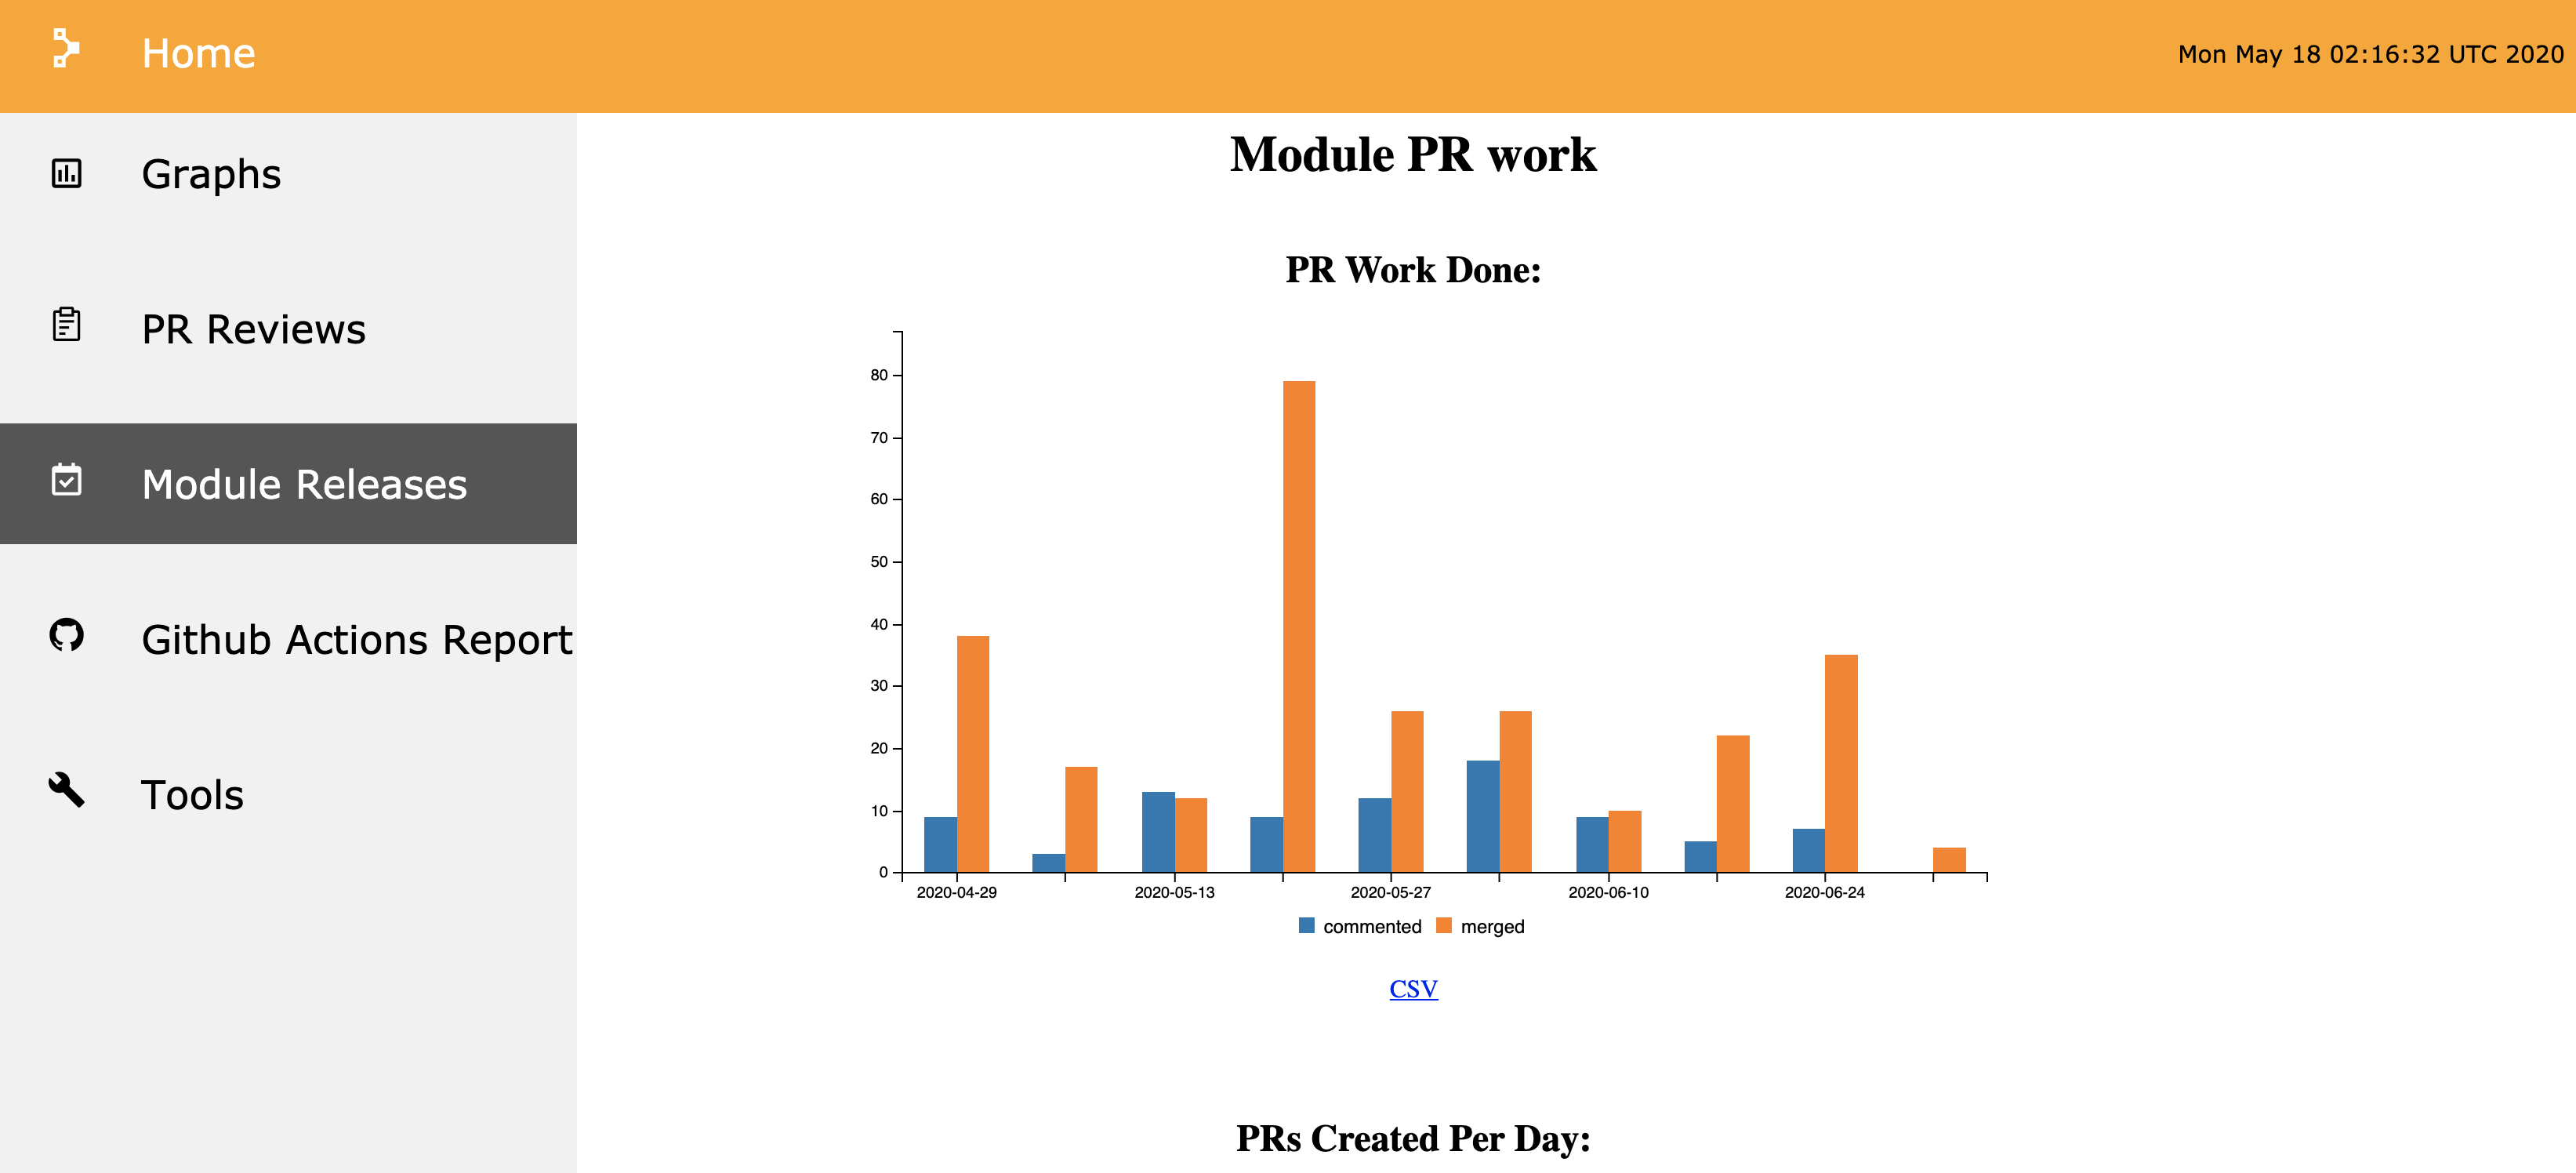 bar chart of commented and merged PRs over time